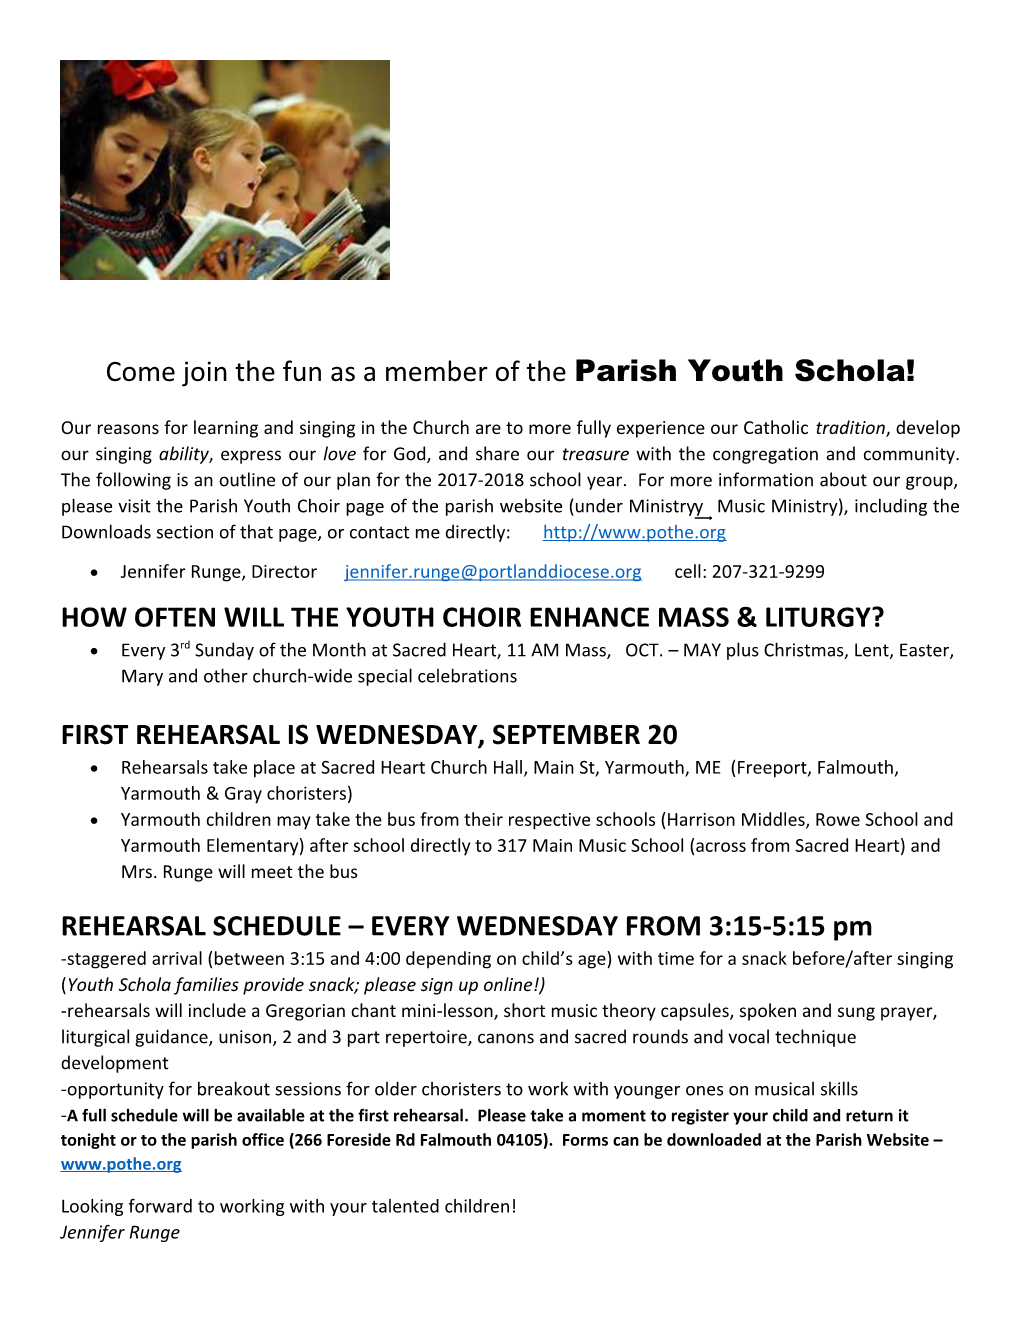 Come Join the Fun As a Member of the Parish Youth Schola!